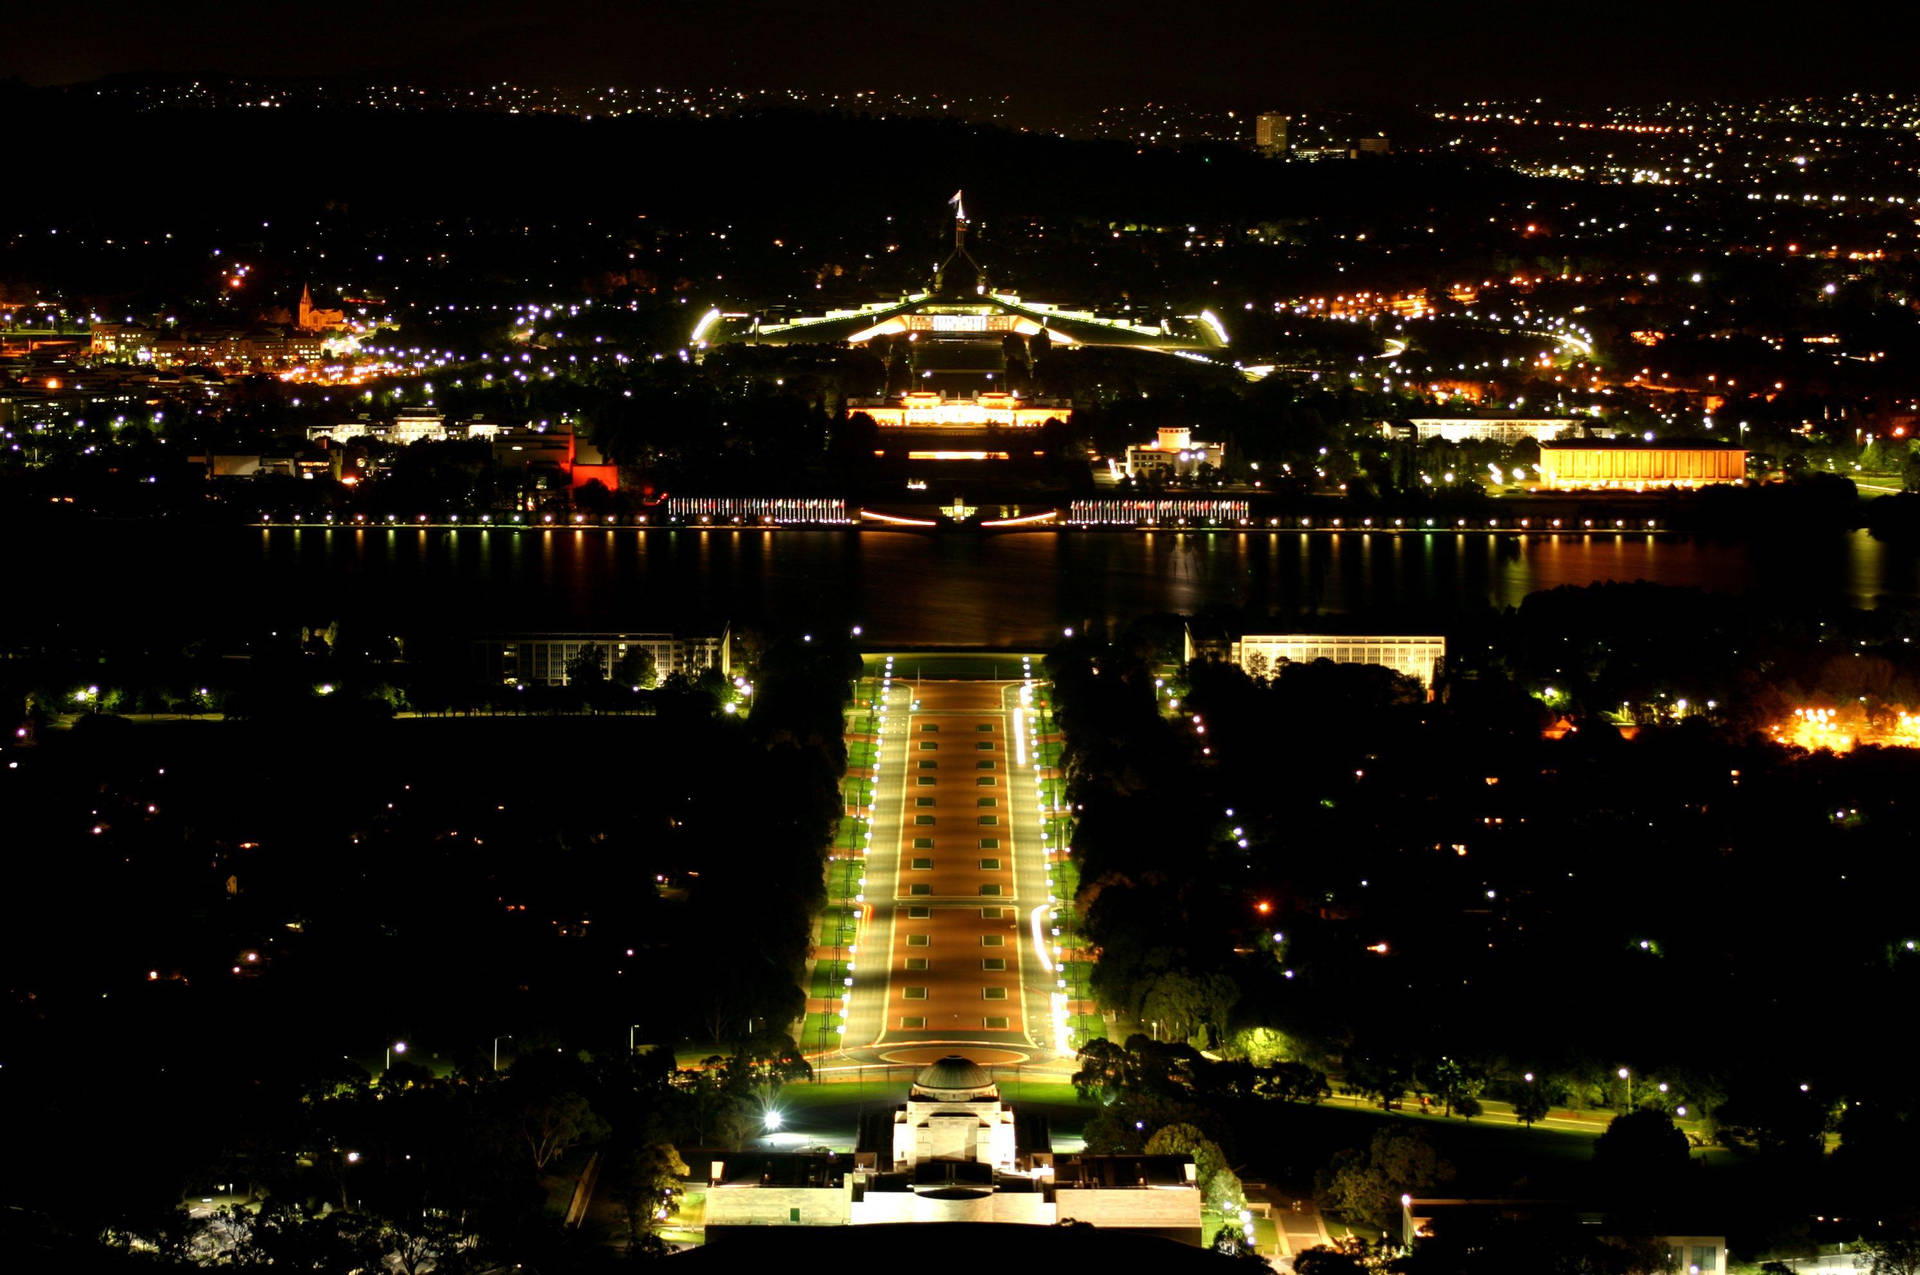 Canberra Parliament House Nighttime Photograph Background